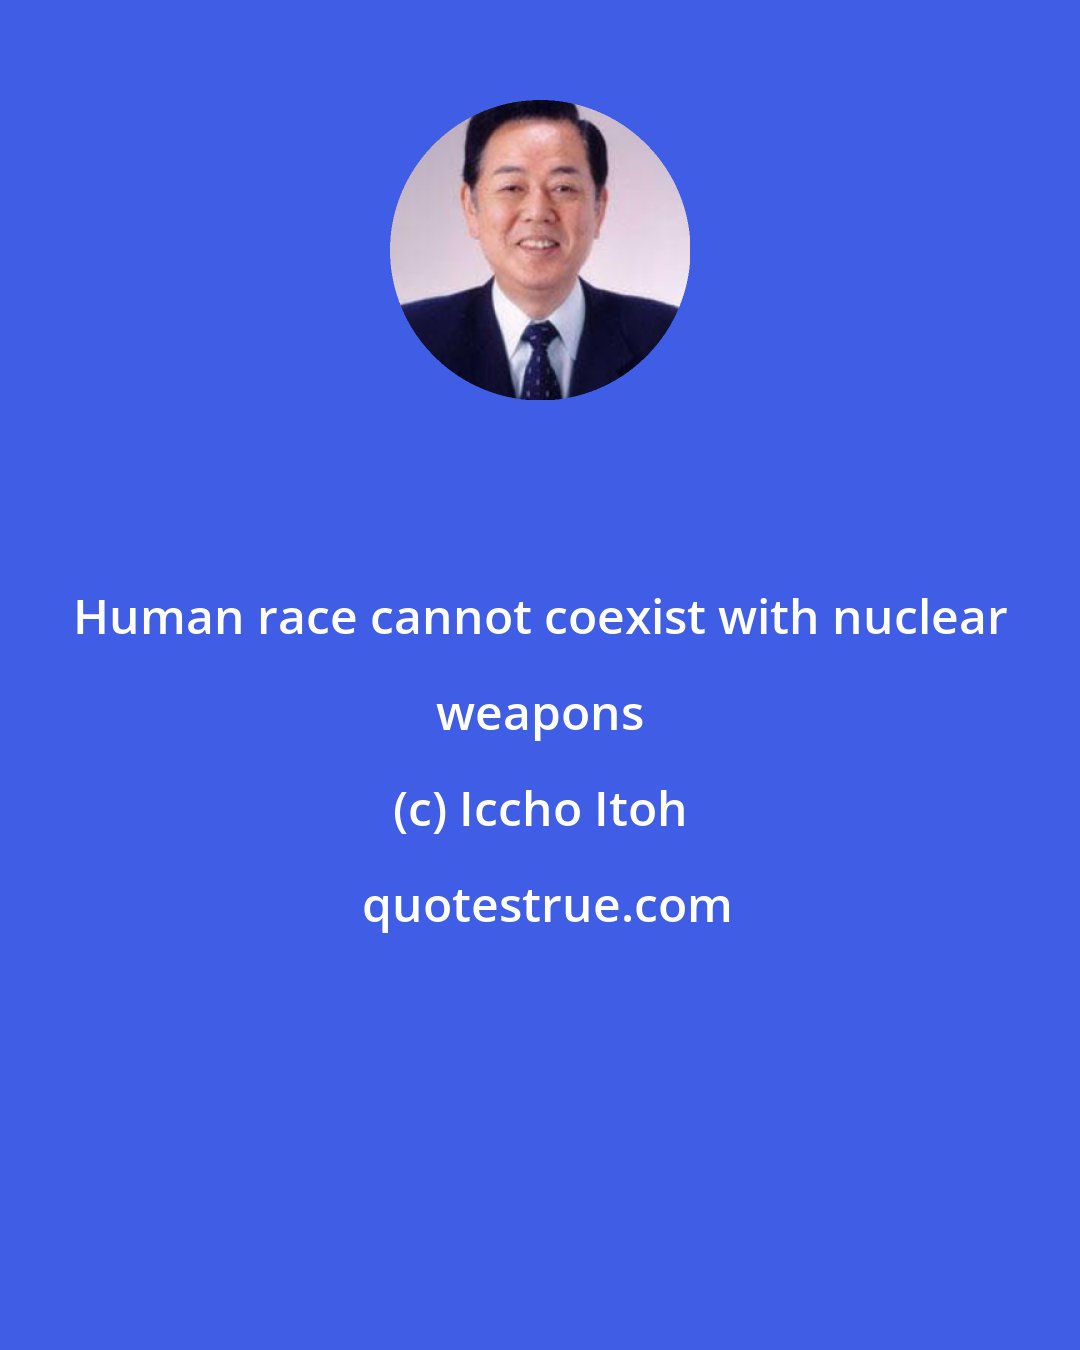 Iccho Itoh: Human race cannot coexist with nuclear weapons